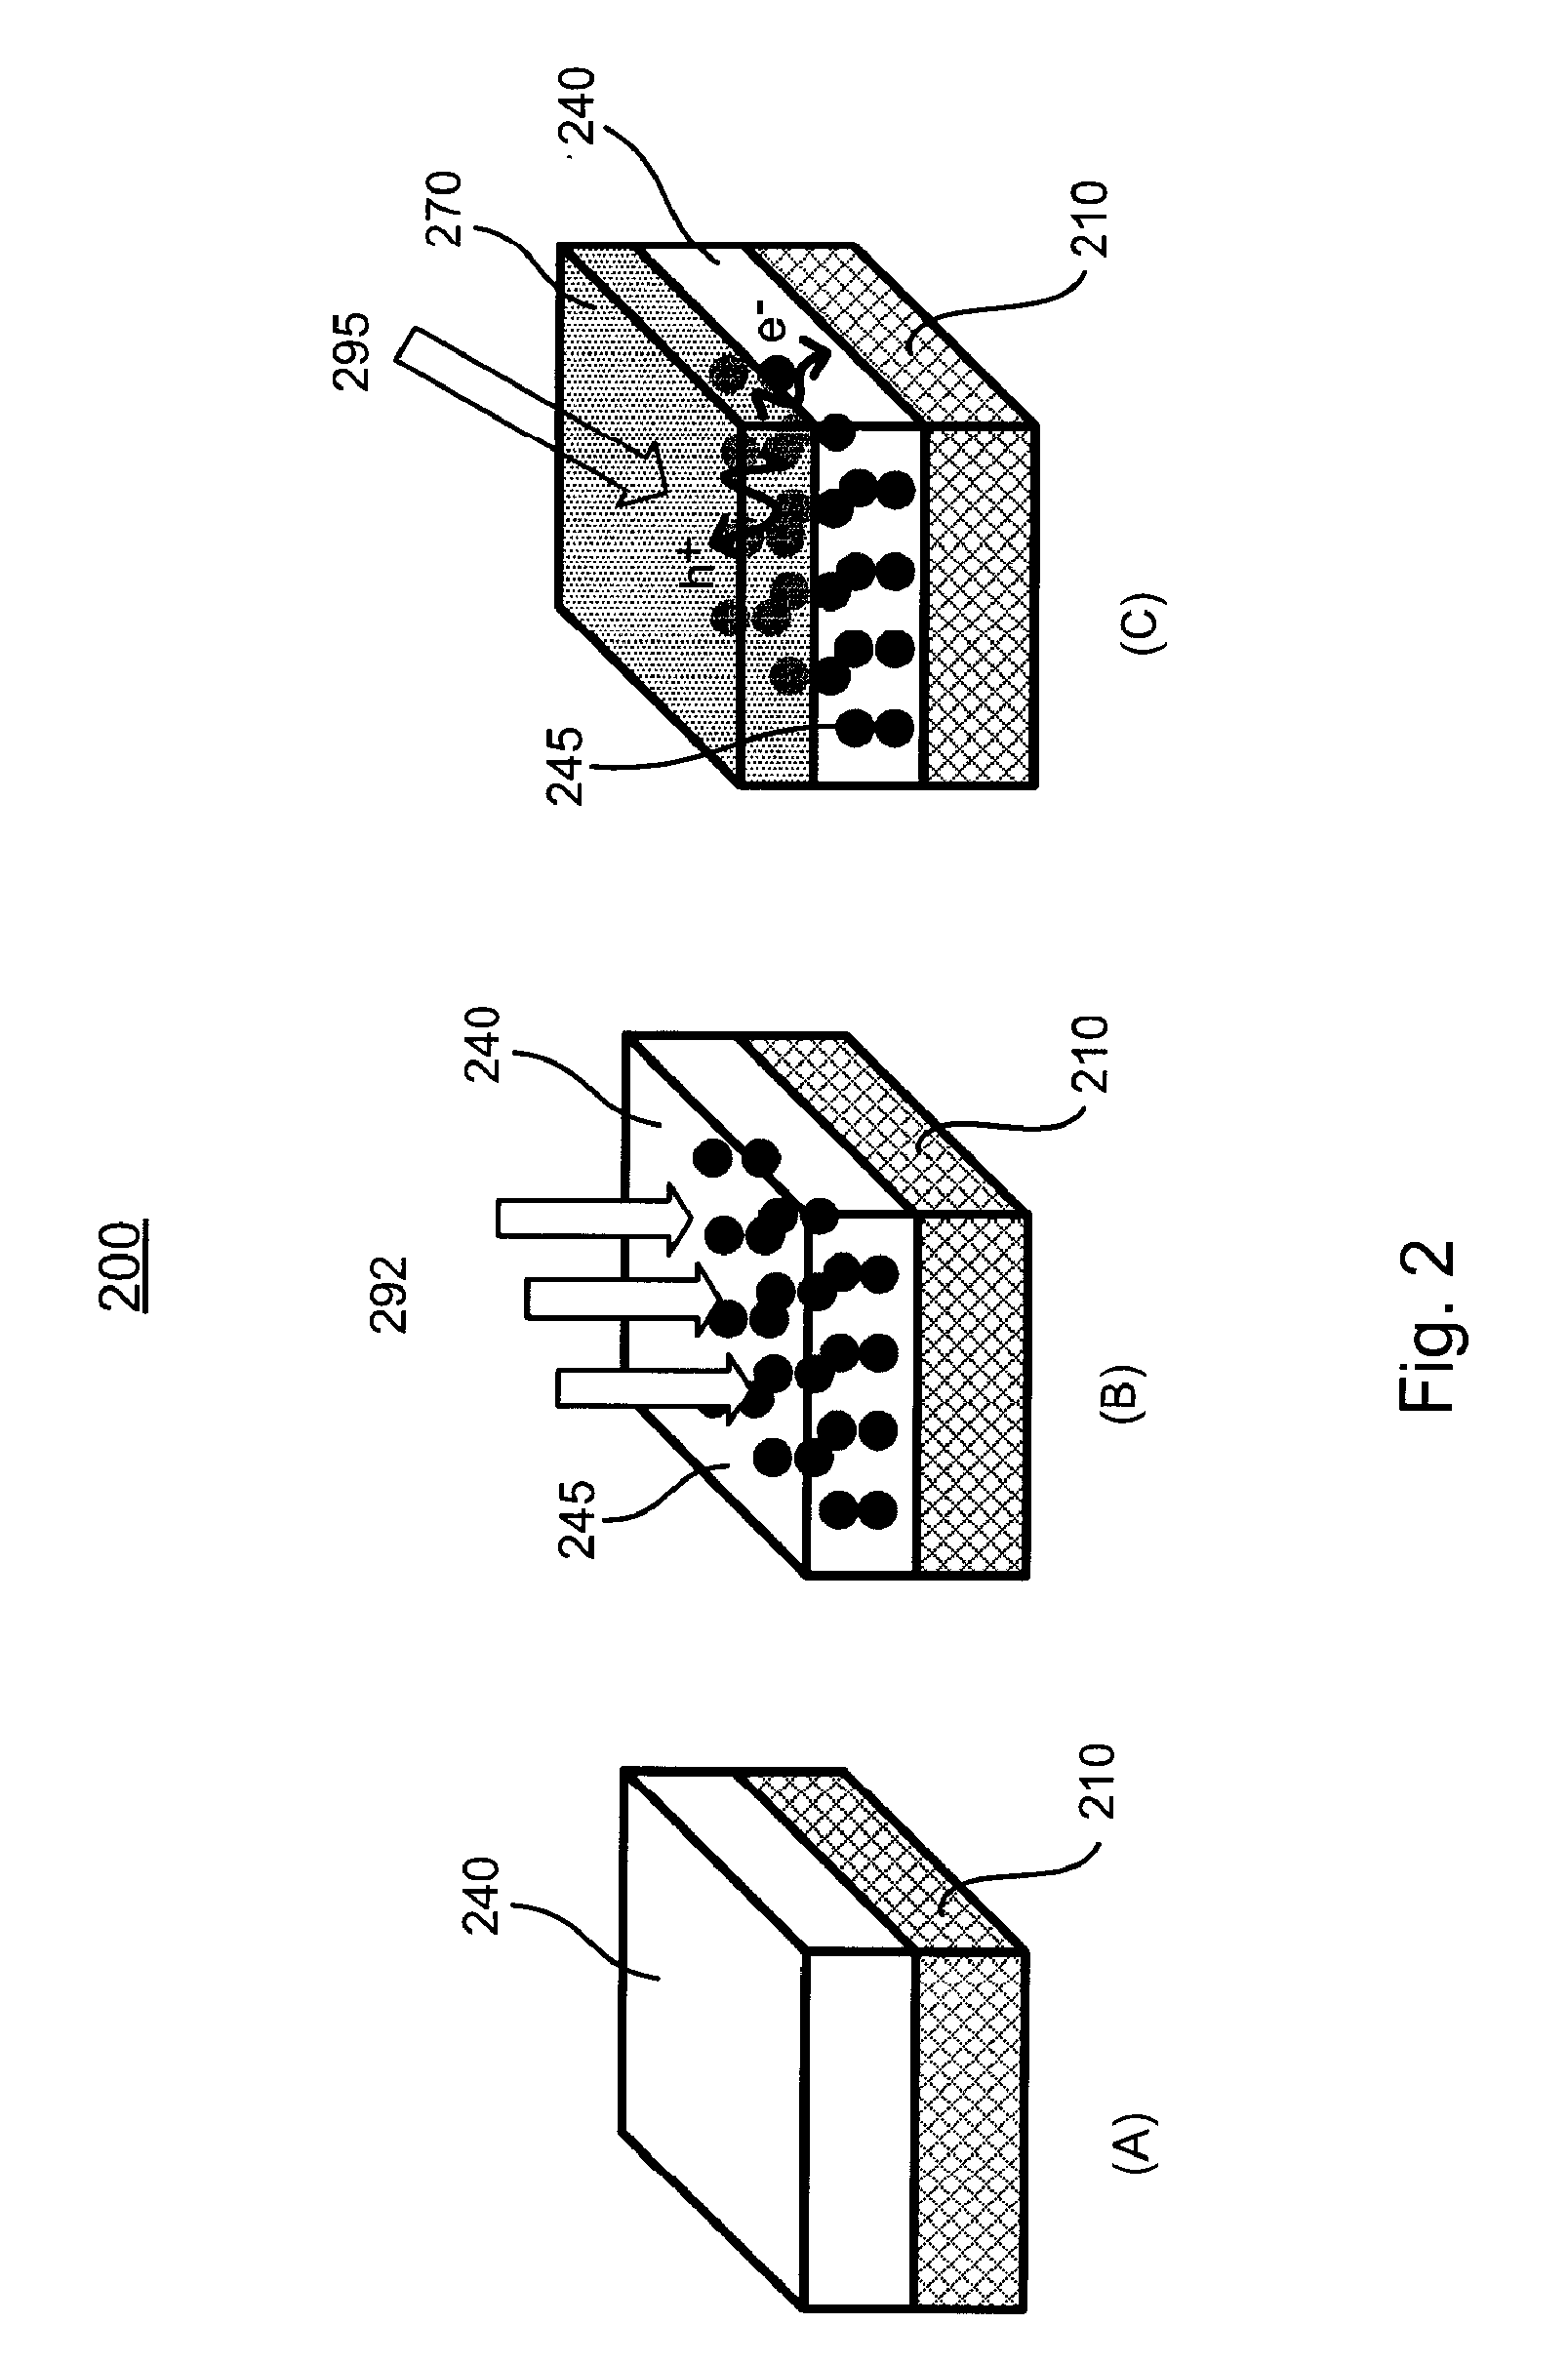 Photovoltaic cells with multi-band gap and applications in a low temperature polycrystalline silicon thin film transistor panel